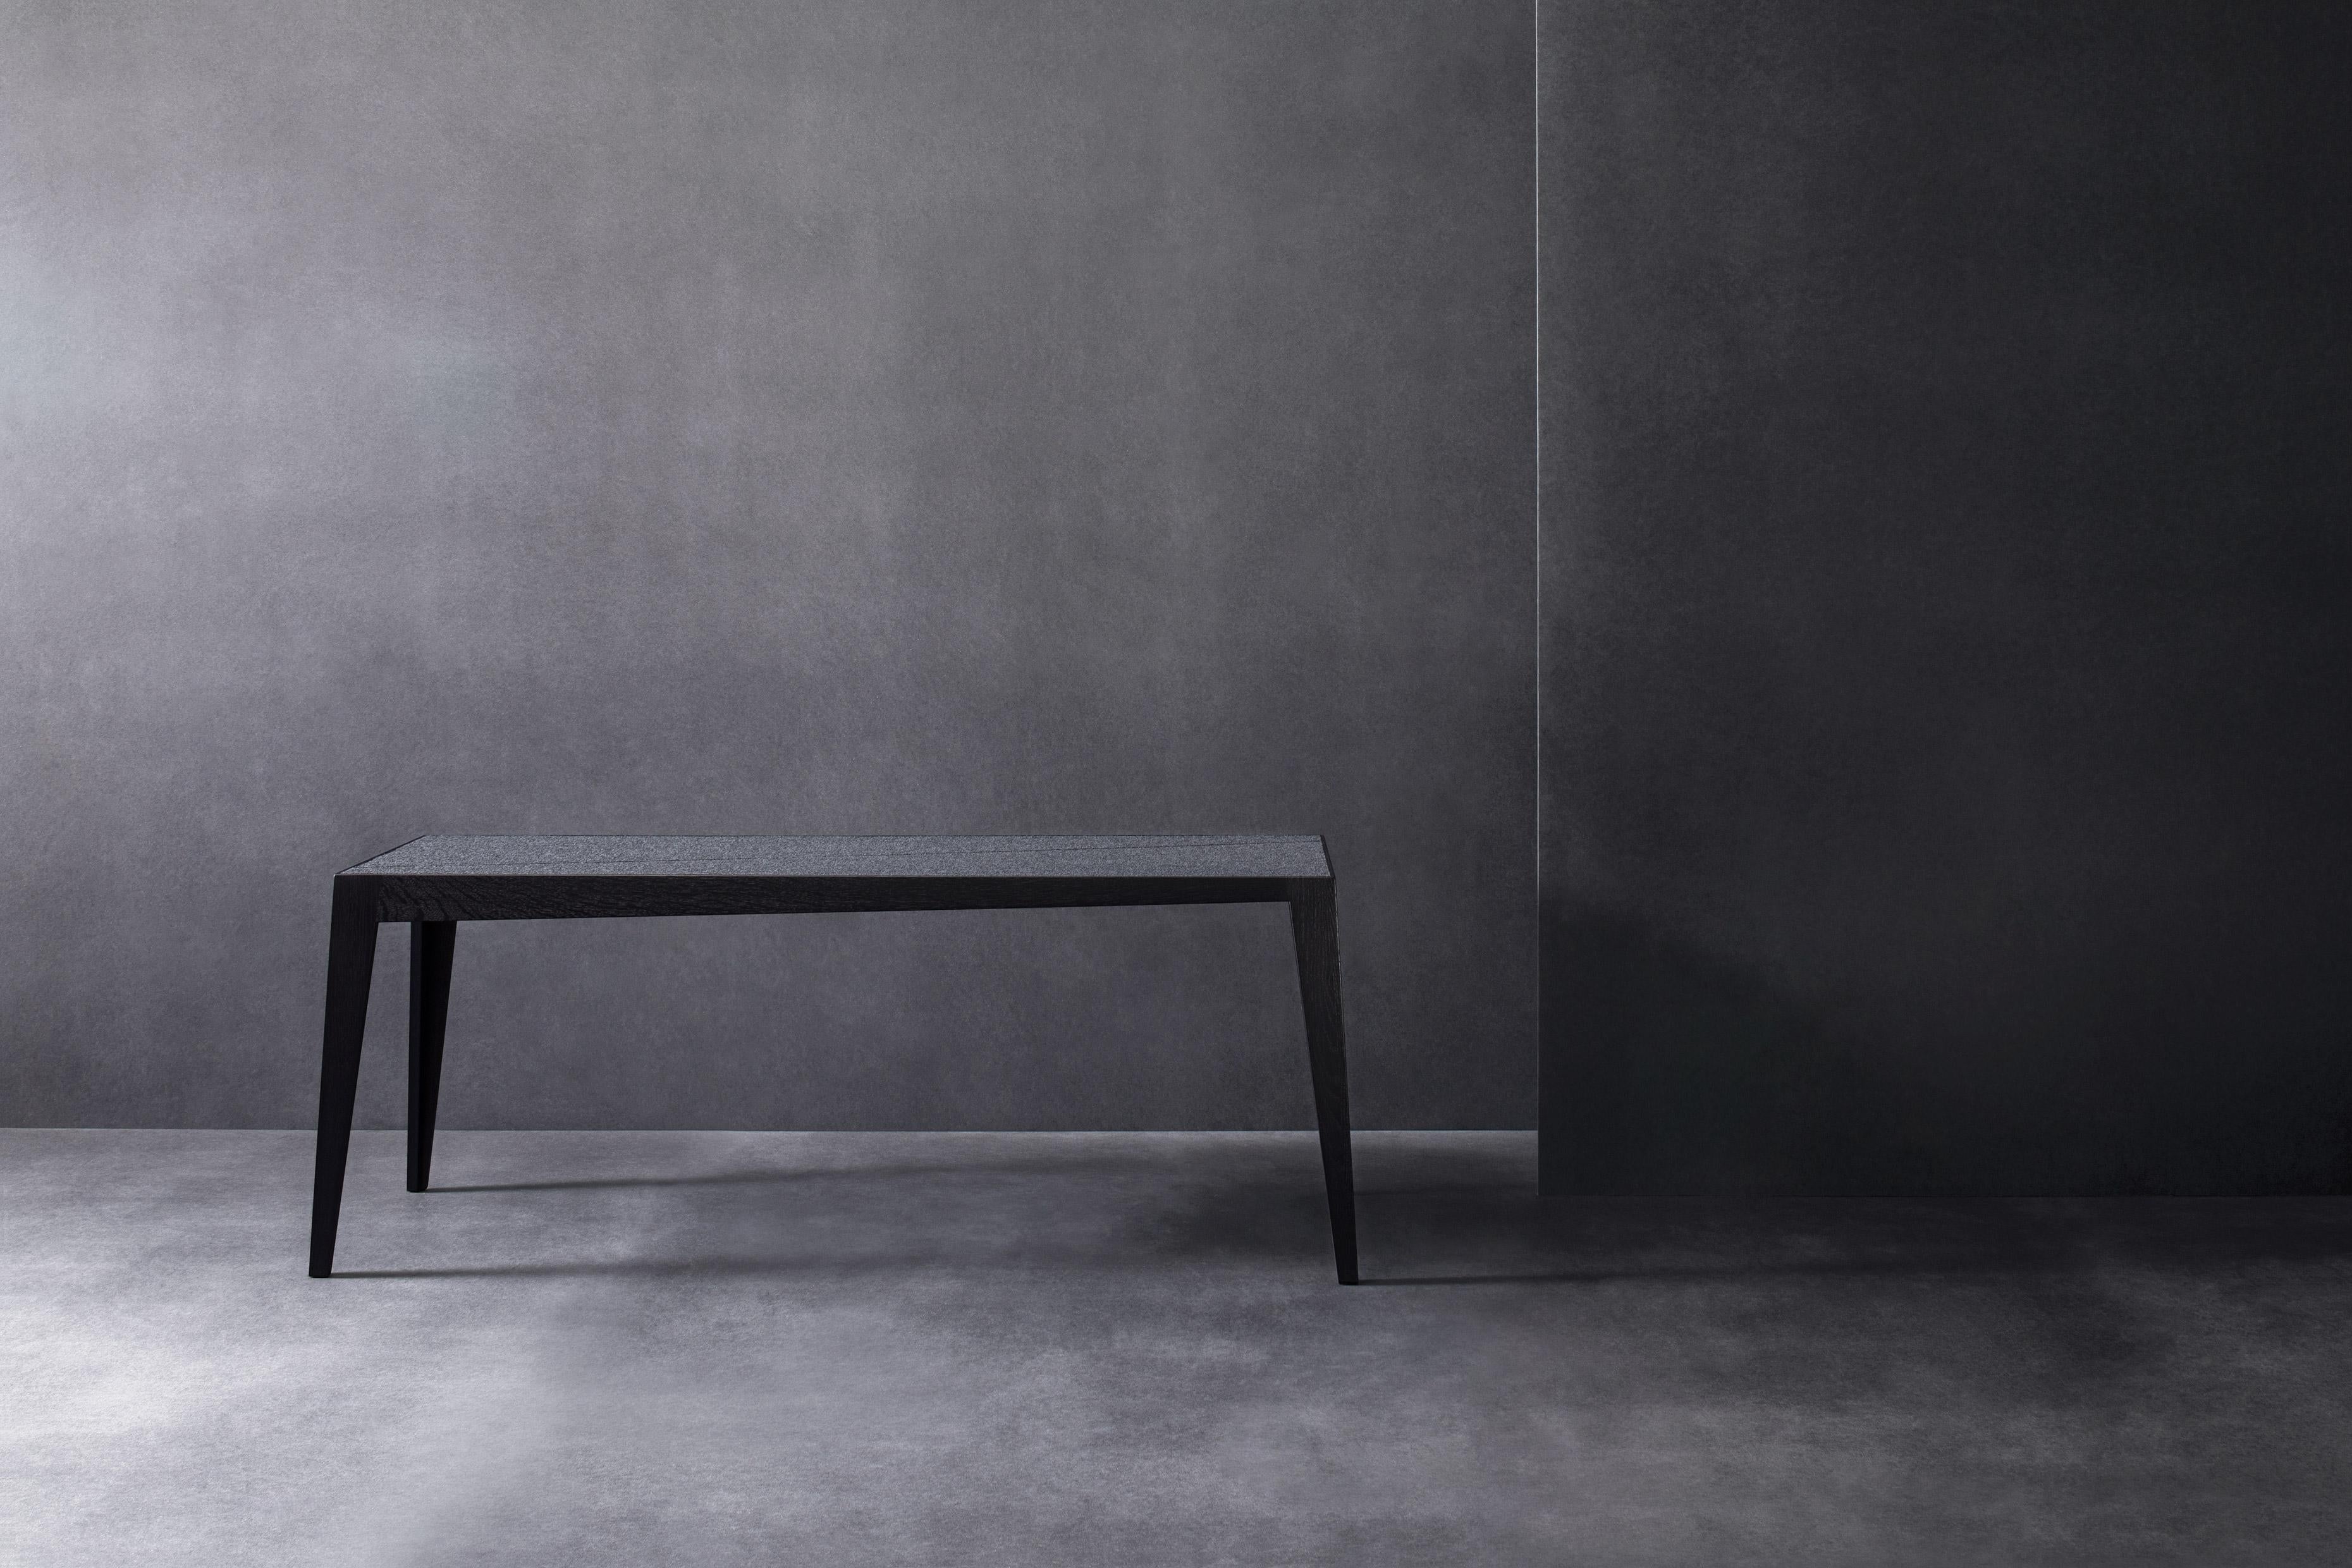 Black oak tocker bench by Matthias Scherzinger
Dimensions: H 48 x W 40 x L 120 cm
Materials: Oak black stained hard wax
 seat: needled felt black-grey

Also available in natural Oak.
Other sizes and types of wood.

The Tocker is a